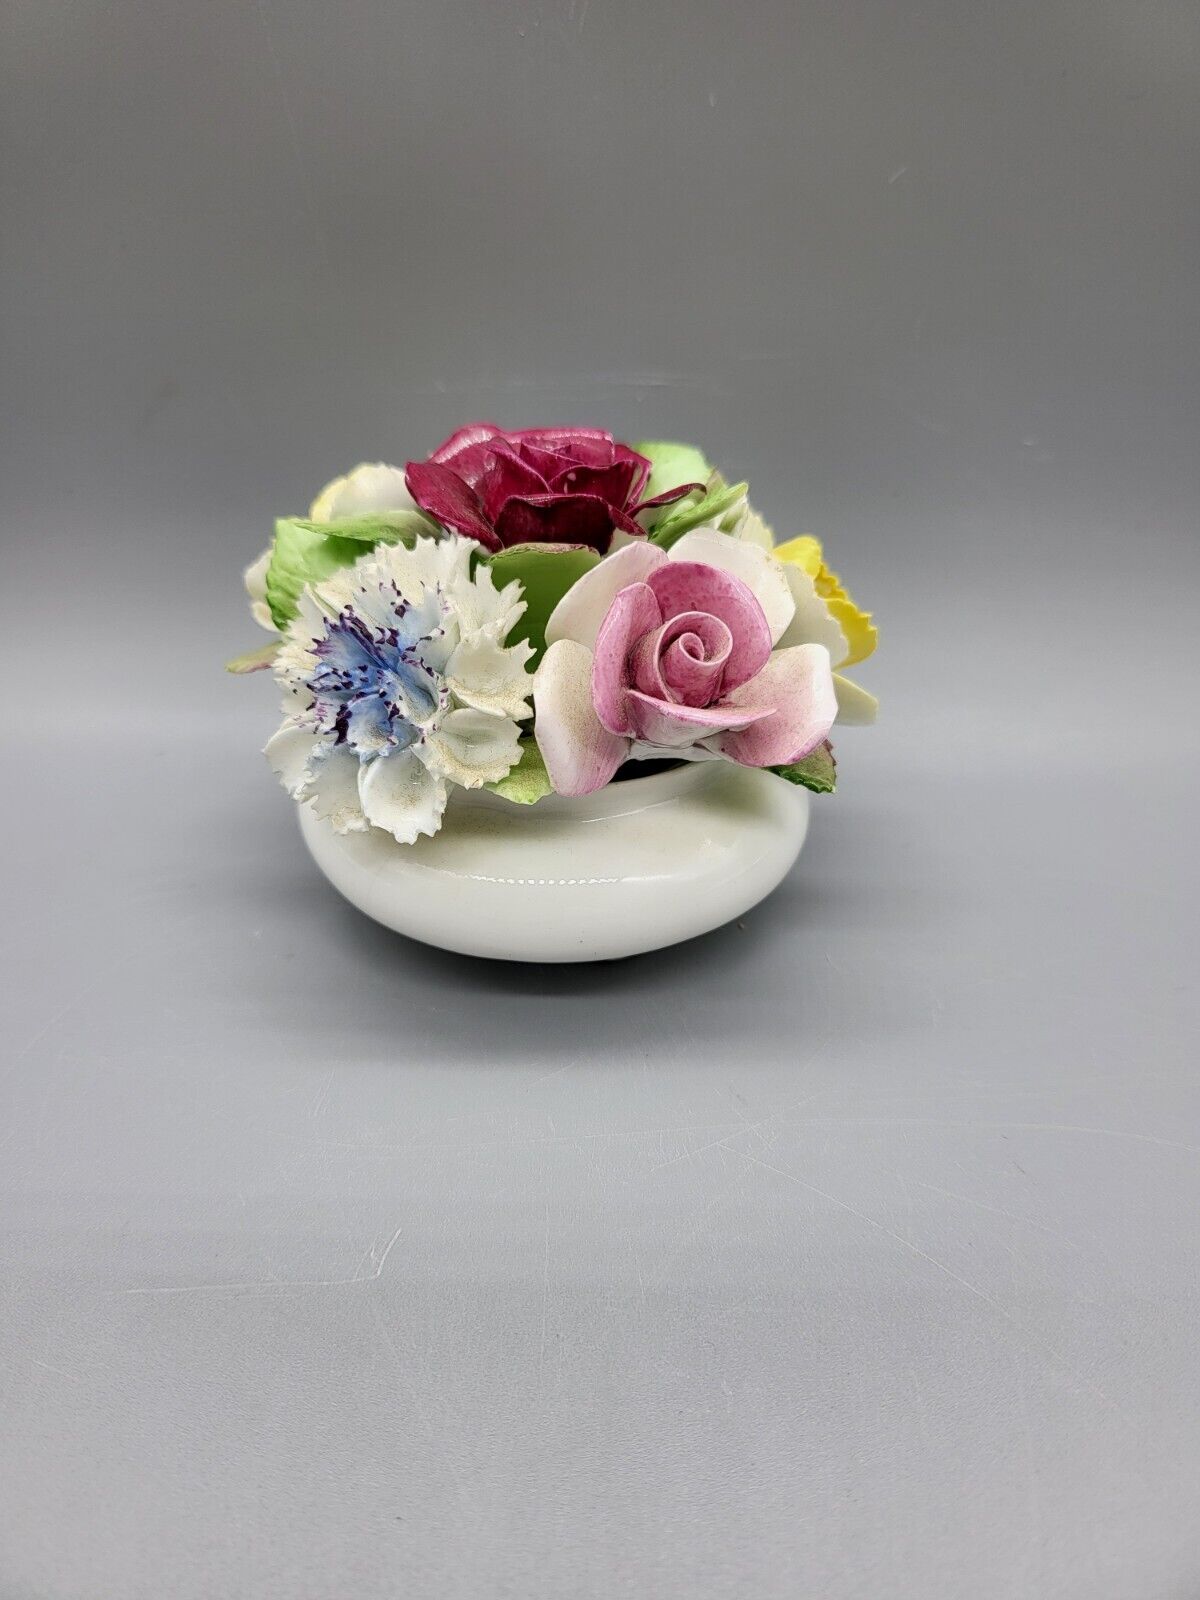 Vintage, Royal Doulton, England, Footed, Bone China Floral Bouquet Planter